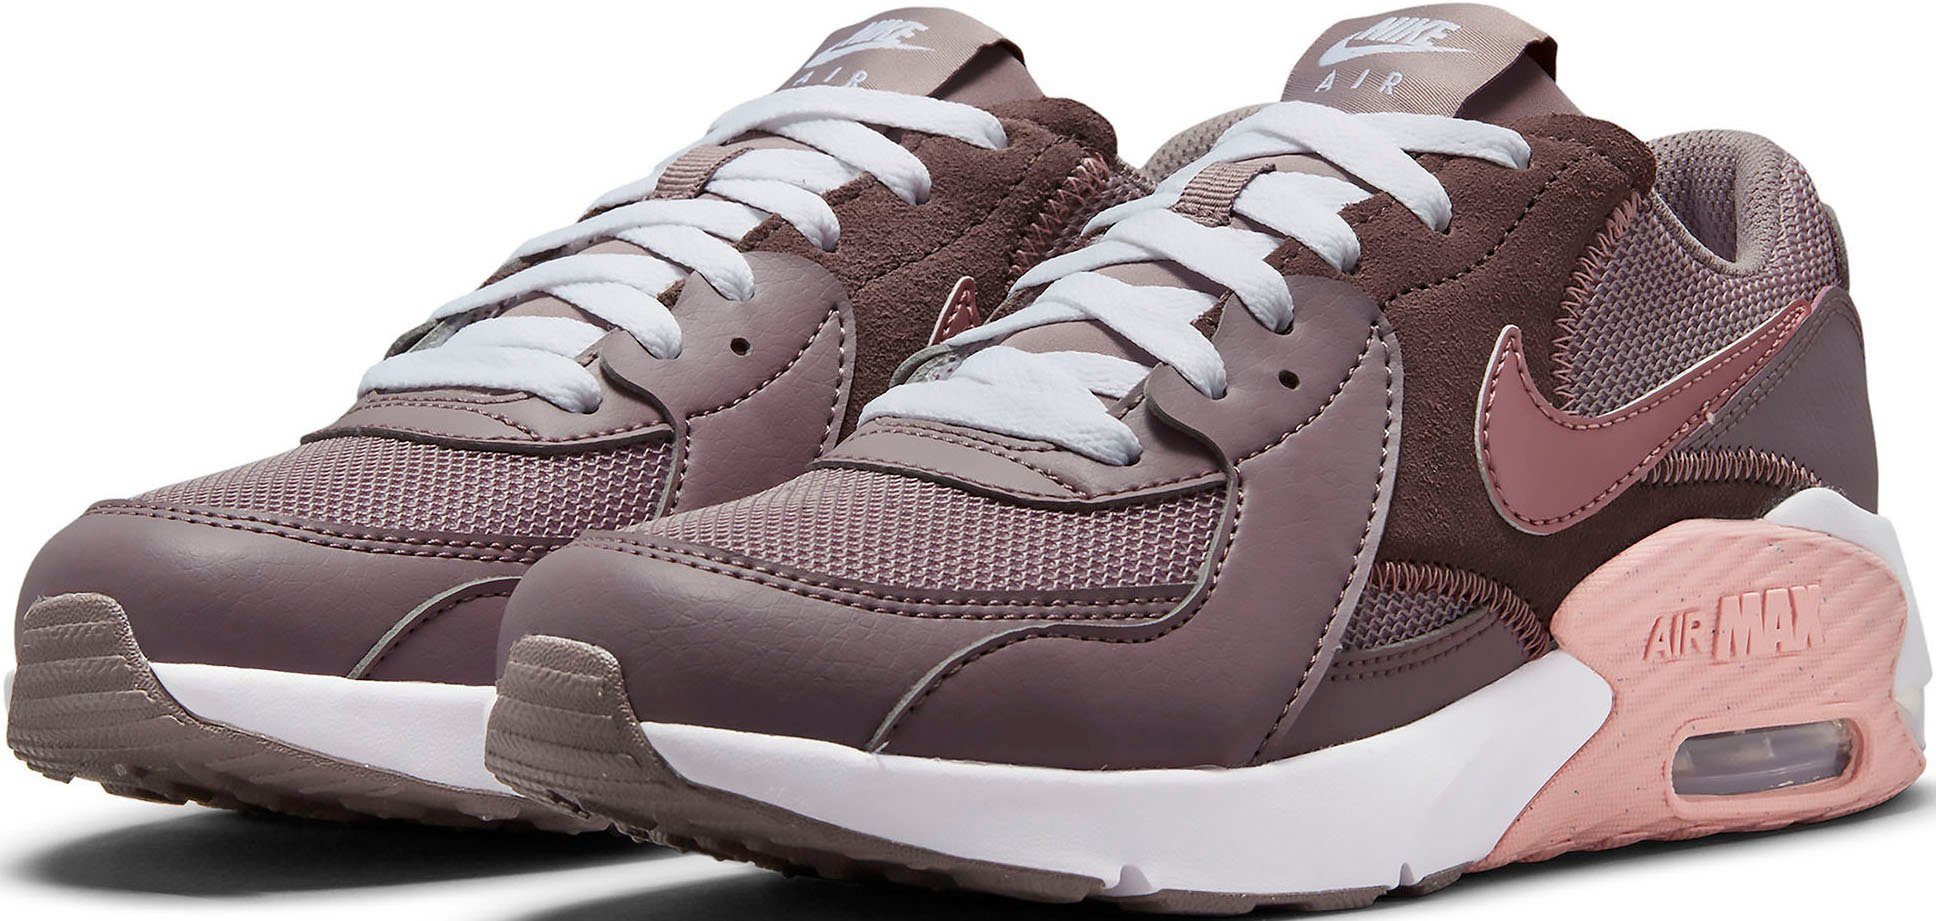 Nike Air Max in rosa online kaufen | OTTO